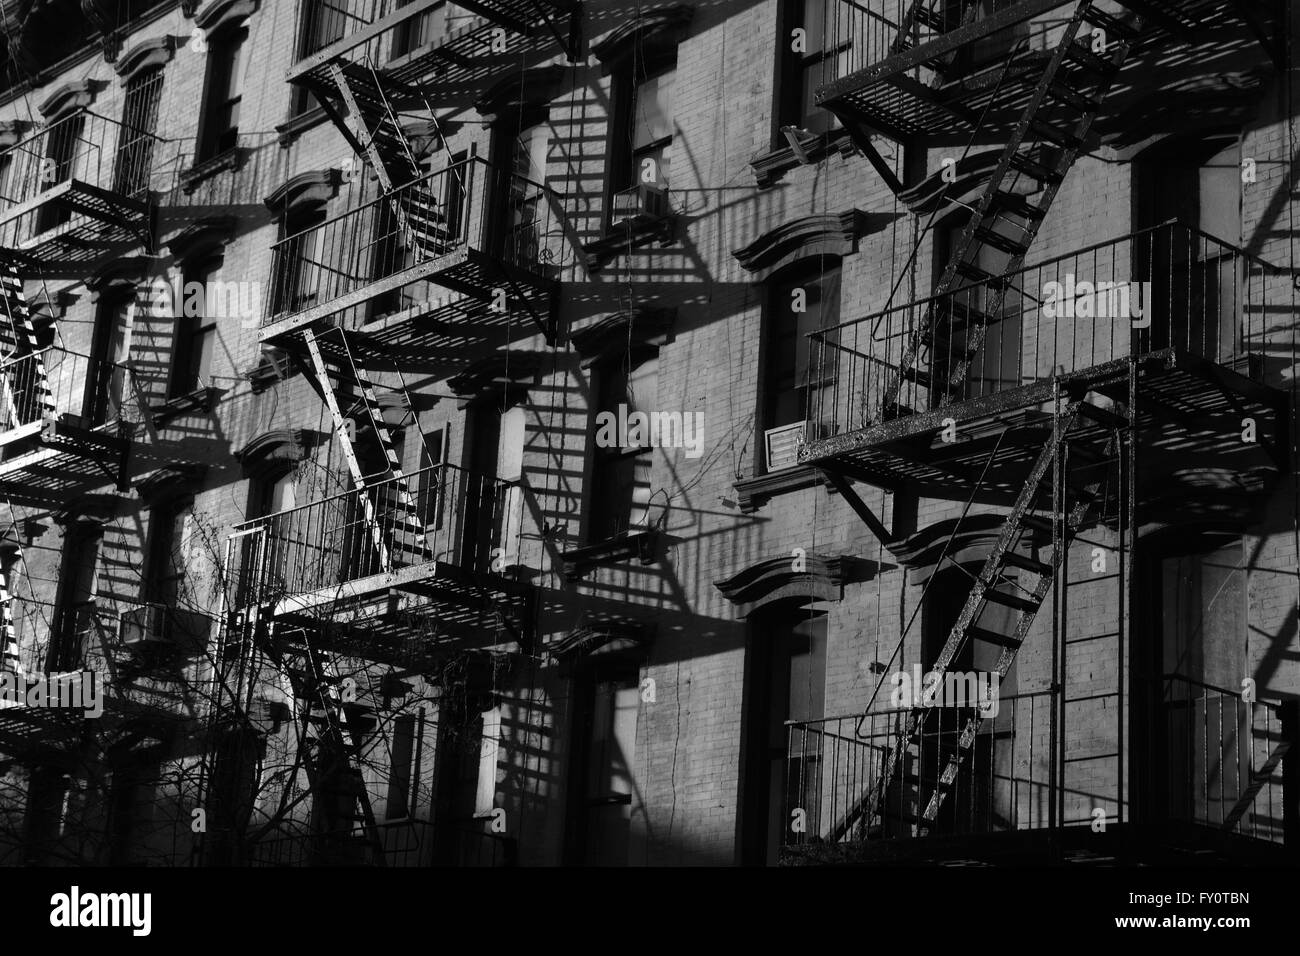 Fire escapes on old brick tenement building on Stanton Street, Lower East Side, New York City. Monochrome, black and white. Stock Photo